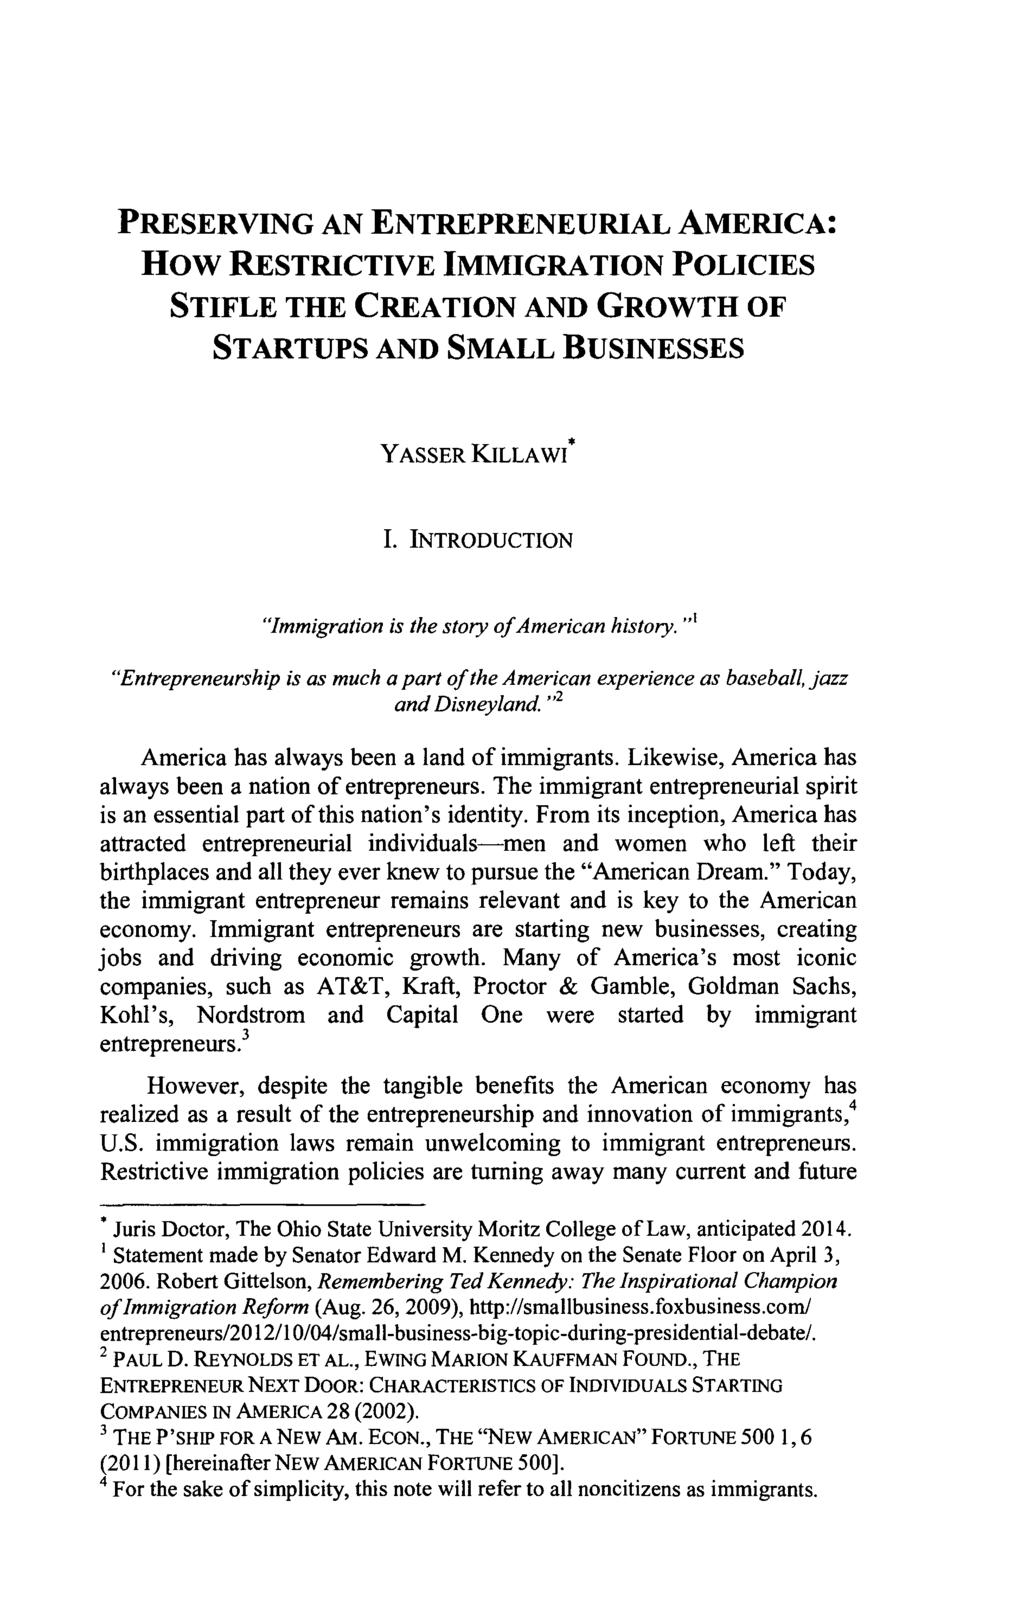 PRESERVING AN ENTREPRENEURIAL AMERICA: How RESTRICTIVE IMMIGRATION POLICIES STIFLE THE CREATION AND GROWTH OF STARTUPS AND SMALL BUSINESSES YASSER KILLAWI I.